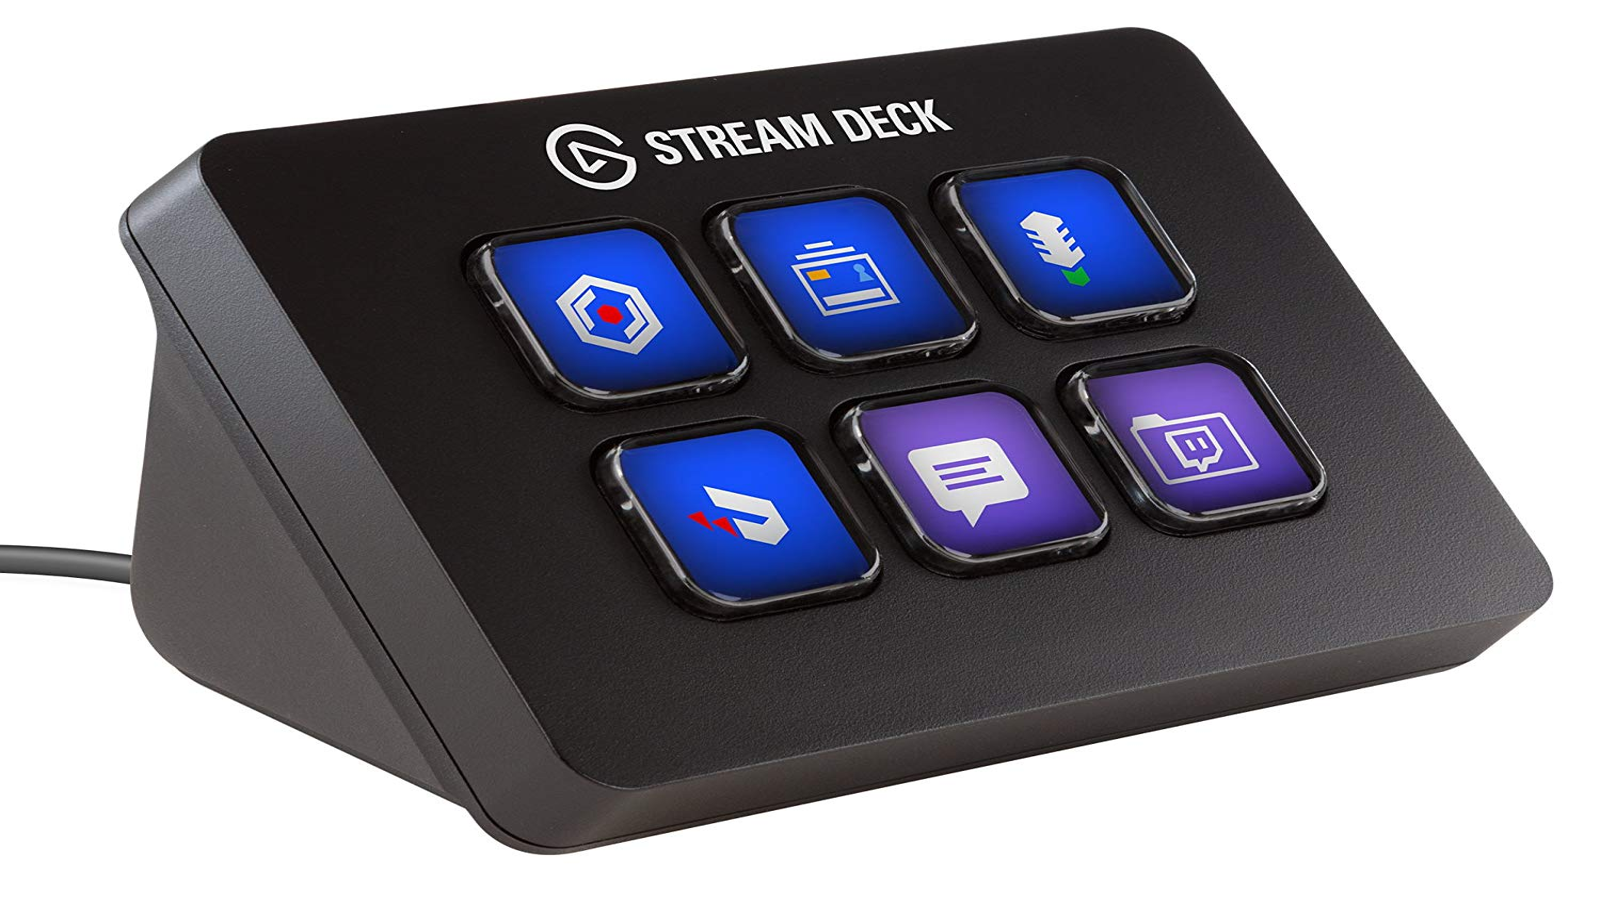 An Elgato Stream Deck Mini is down to £72.99 at